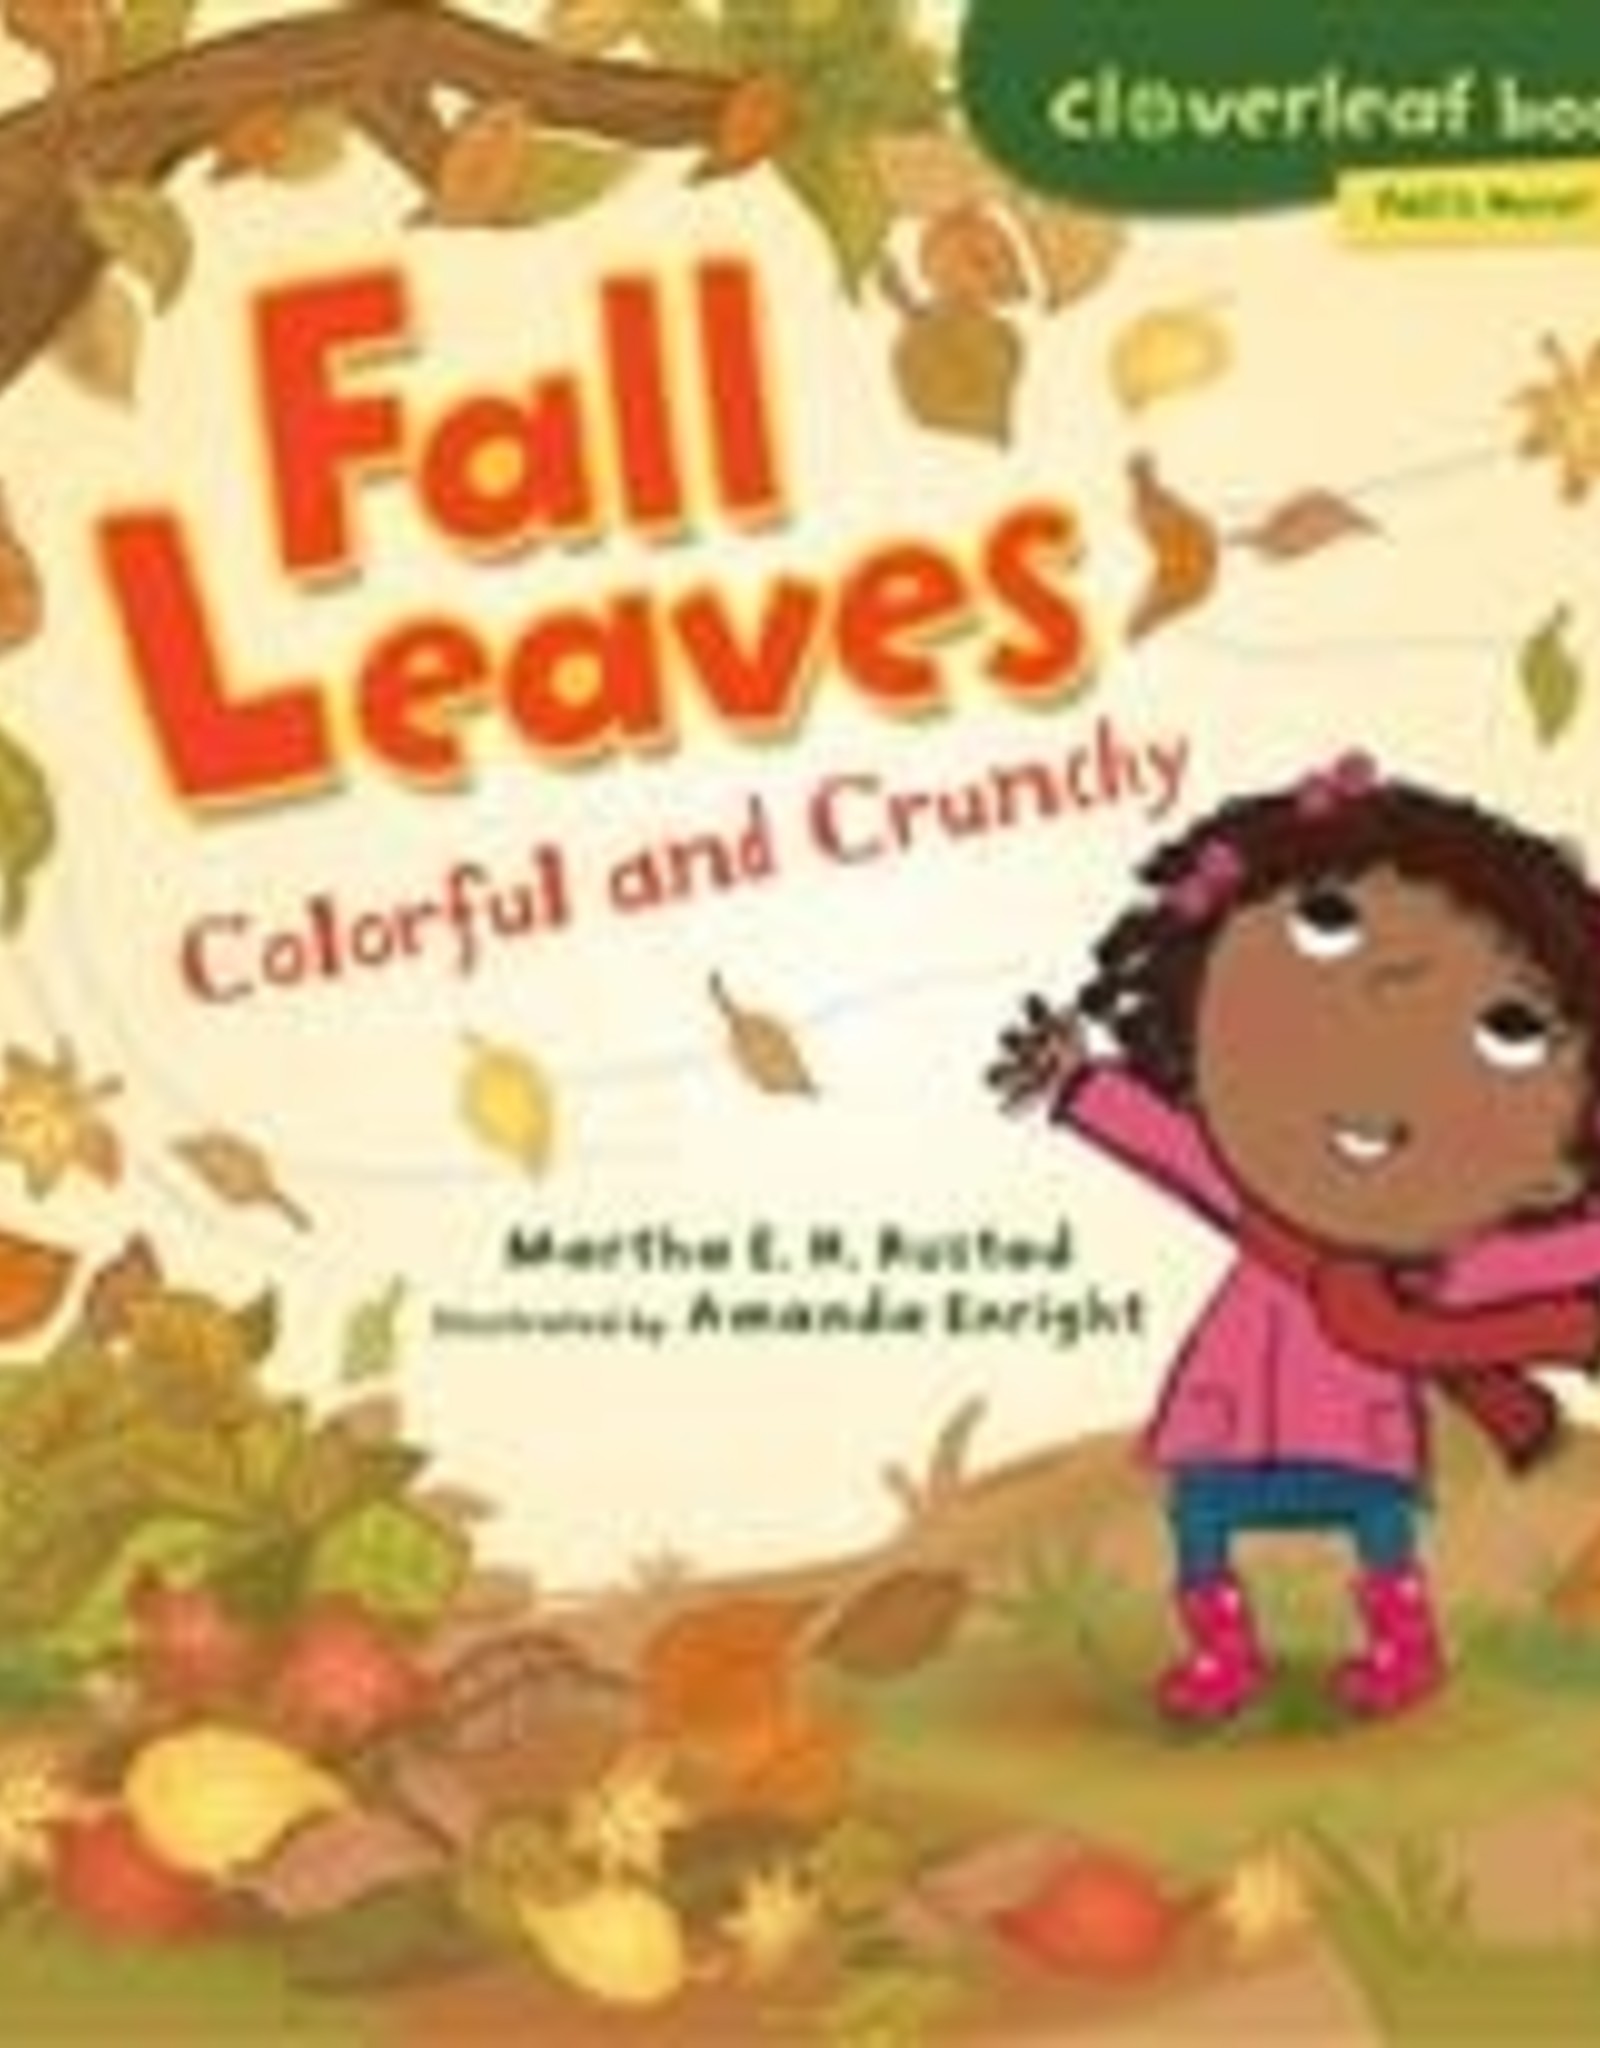 Fall Leaves - Colourful and Crunchy